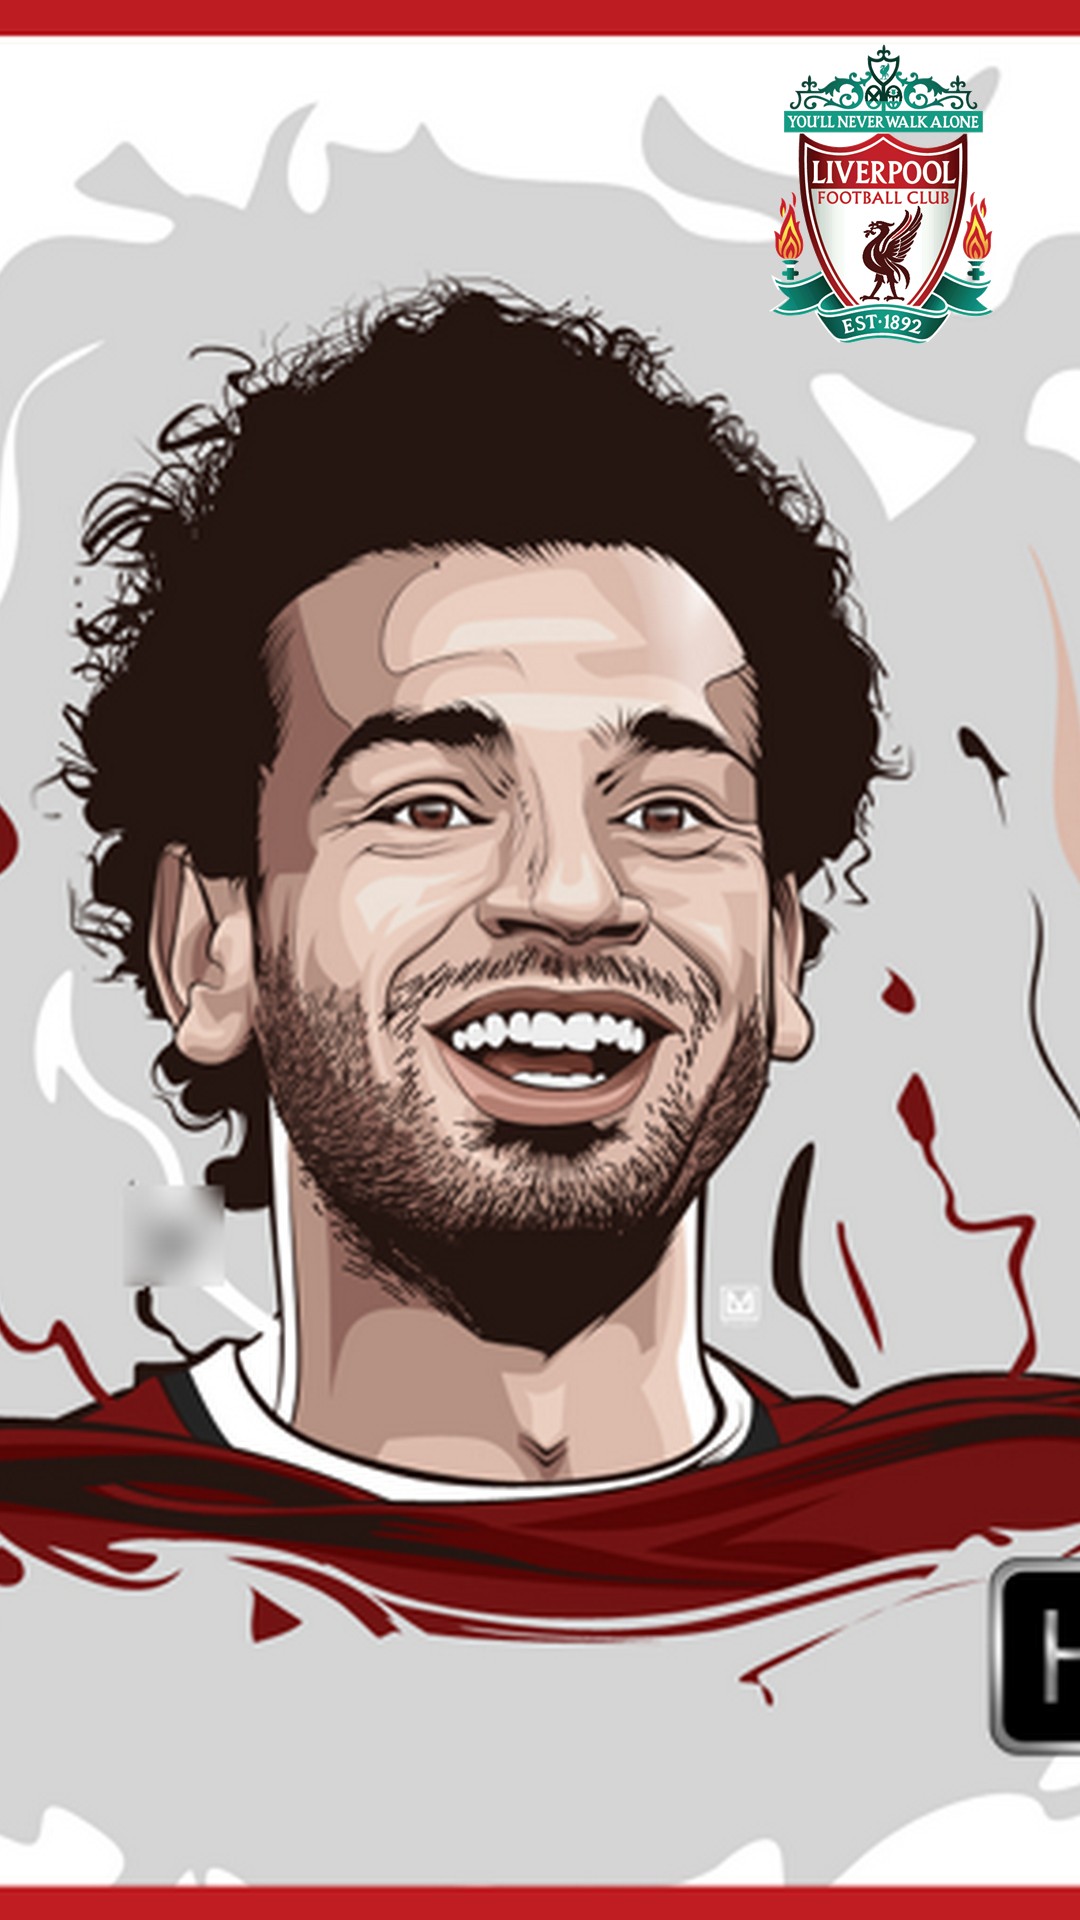 Android Wallpaper HD Liverpool Mohamed Salah with image resolution 1080x1920 pixel. You can make this wallpaper for your Android backgrounds, Tablet, Smartphones Screensavers and Mobile Phone Lock Screen